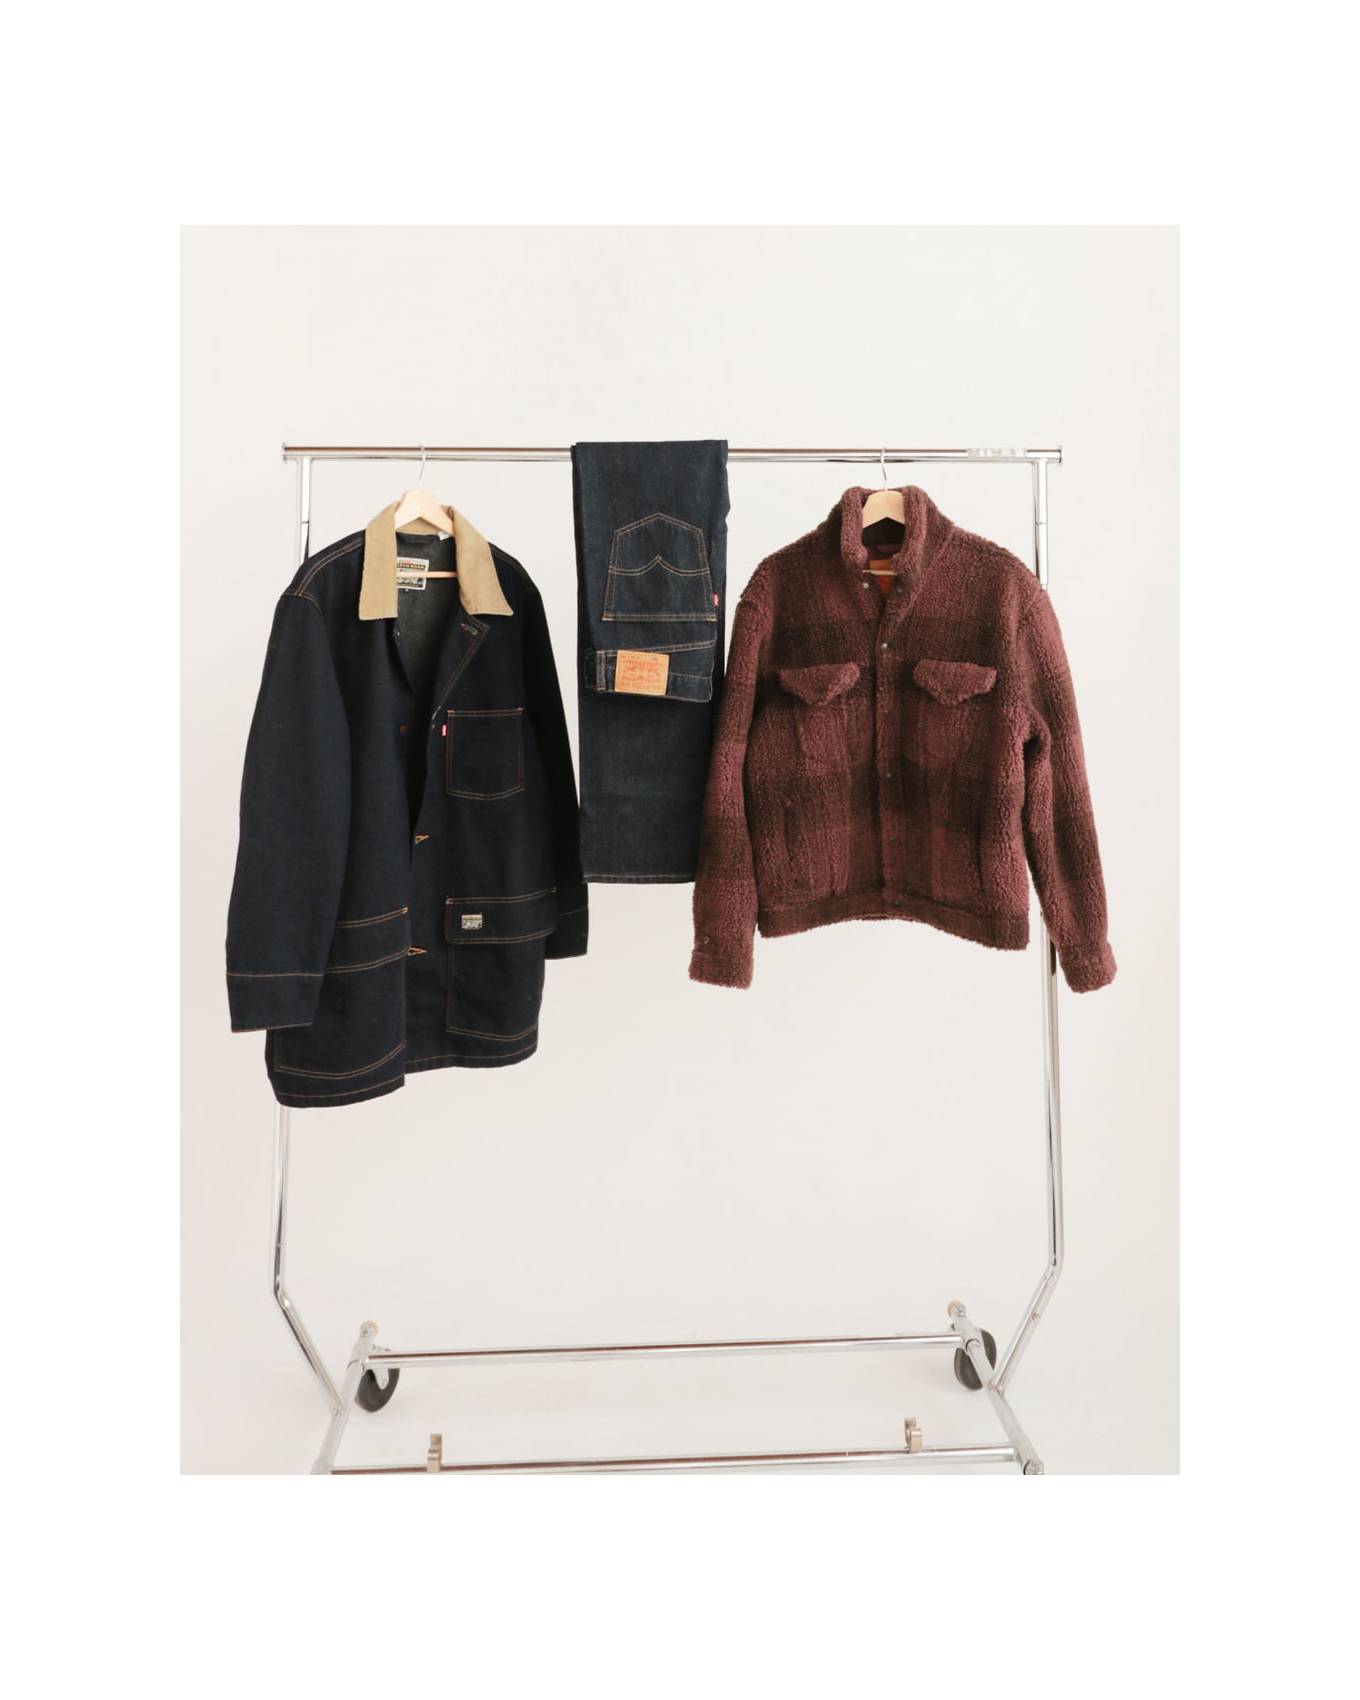 Rack of clothing against a white backdrop that displays some of Gabe's favorite selected items (2 jackets and a pair of blue jeans)